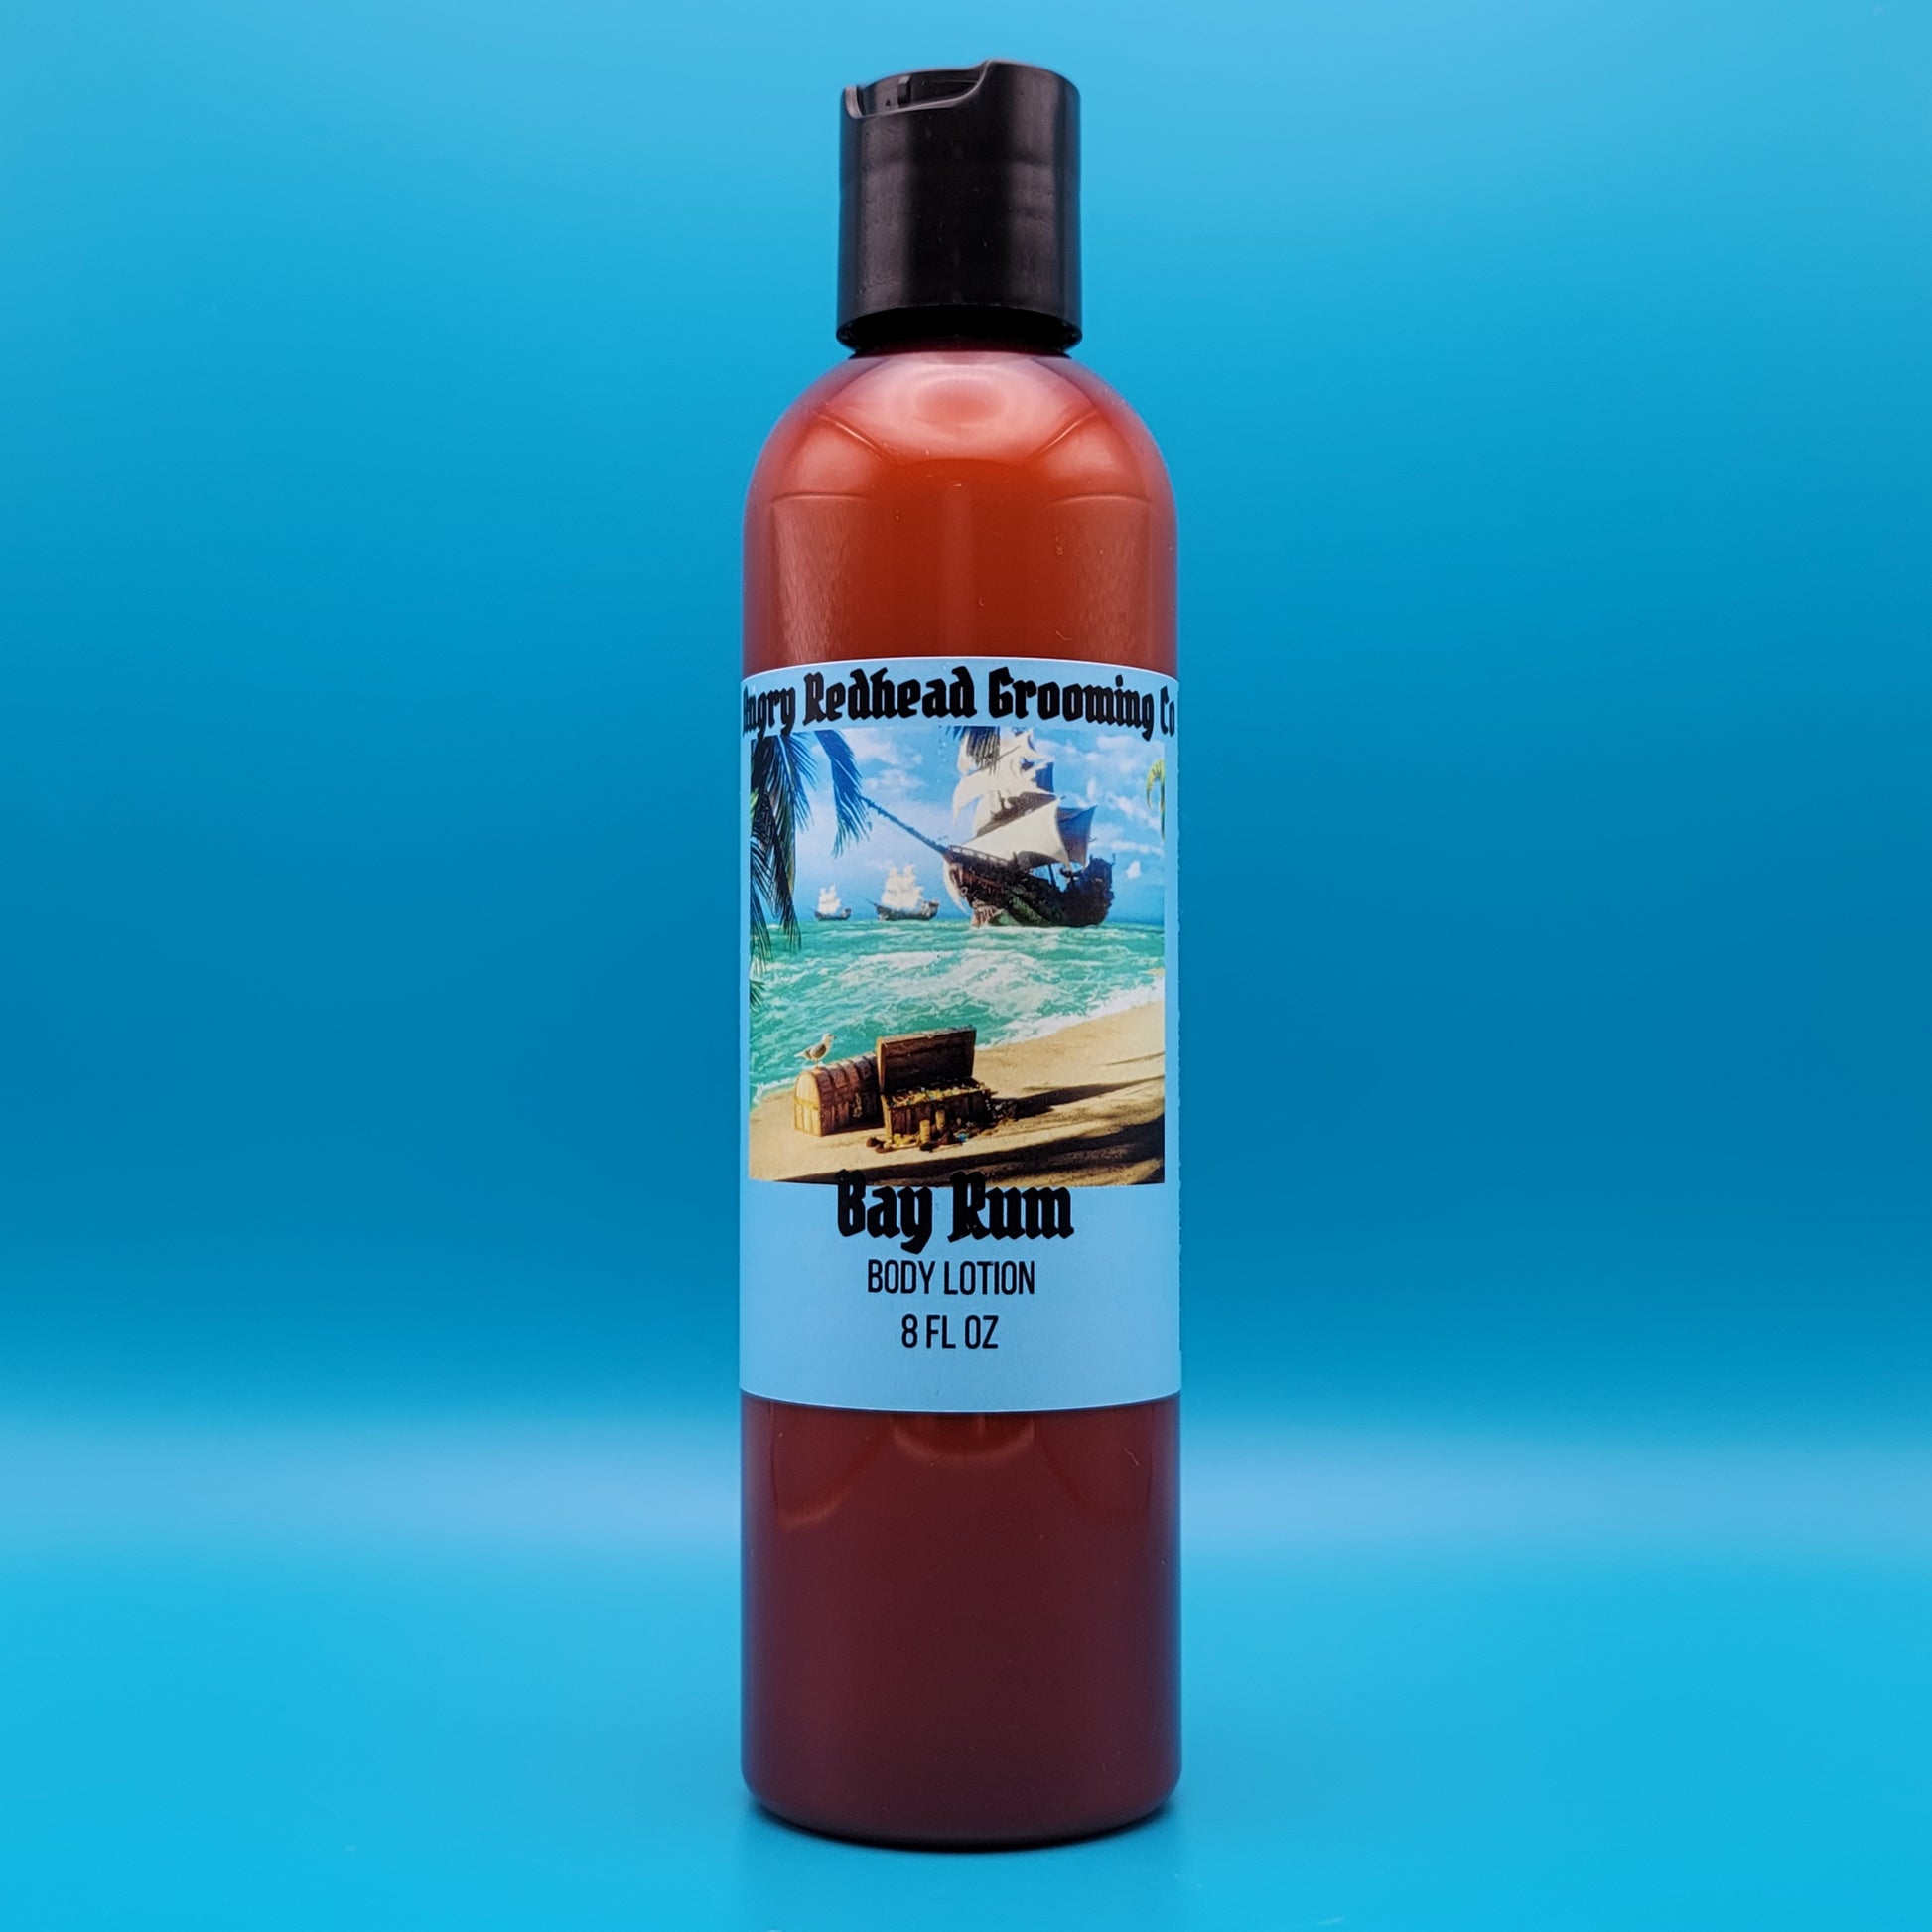 Bay Rum Body Lotion by Angry Redhead Grooming Co - angryredheadgrooming.com